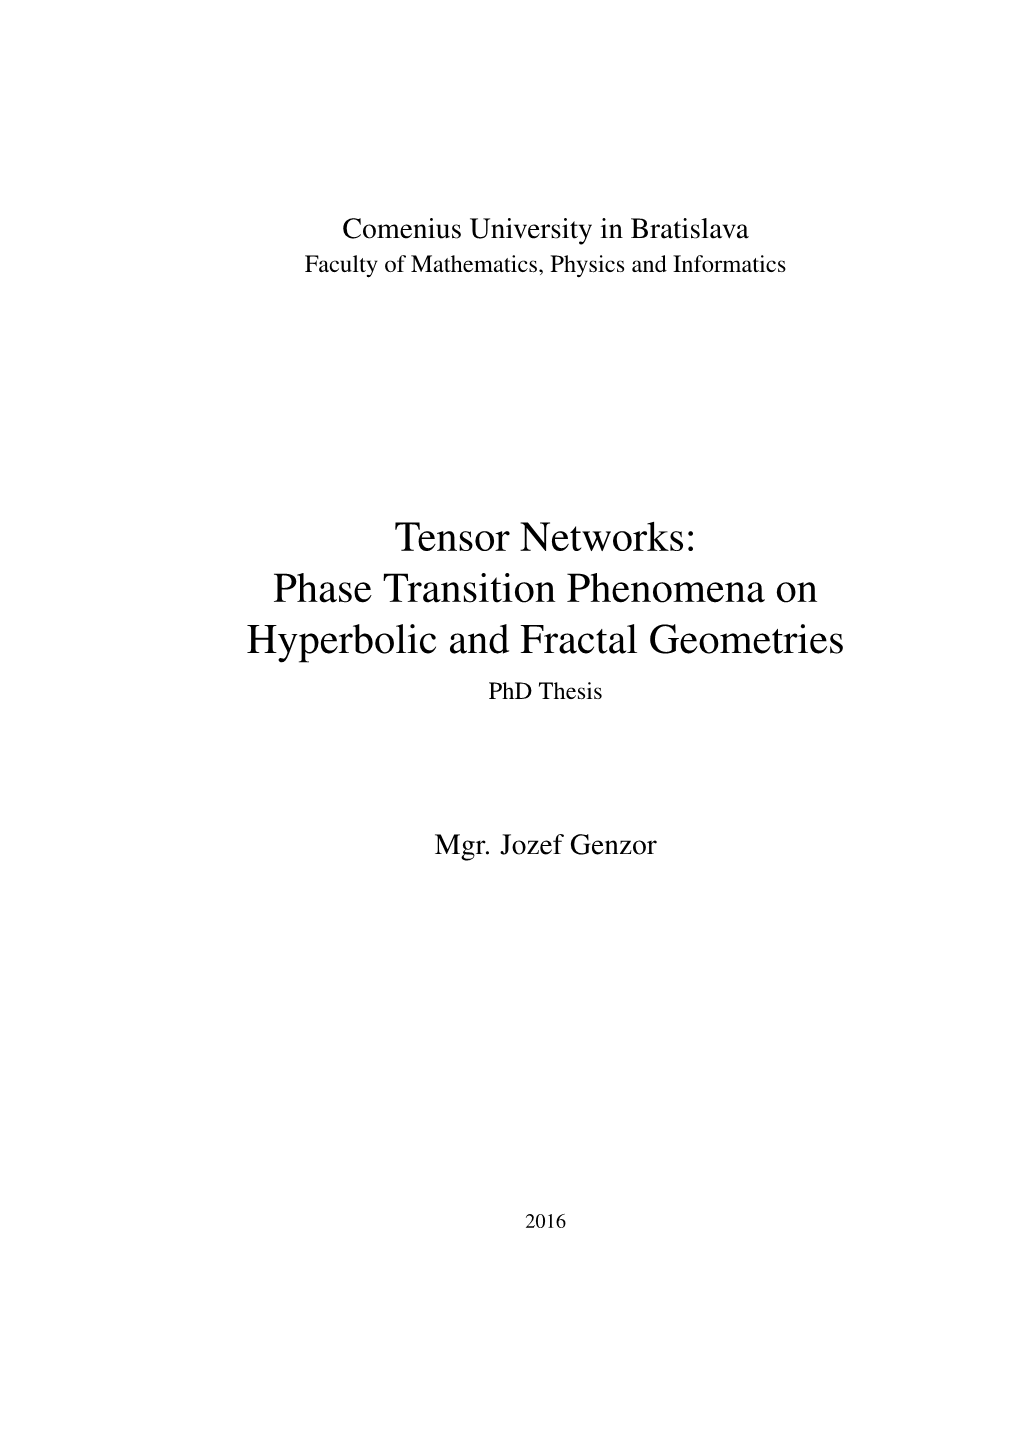 Tensor Networks: Phase Transition Phenomena on Hyperbolic and Fractal Geometries Phd Thesis